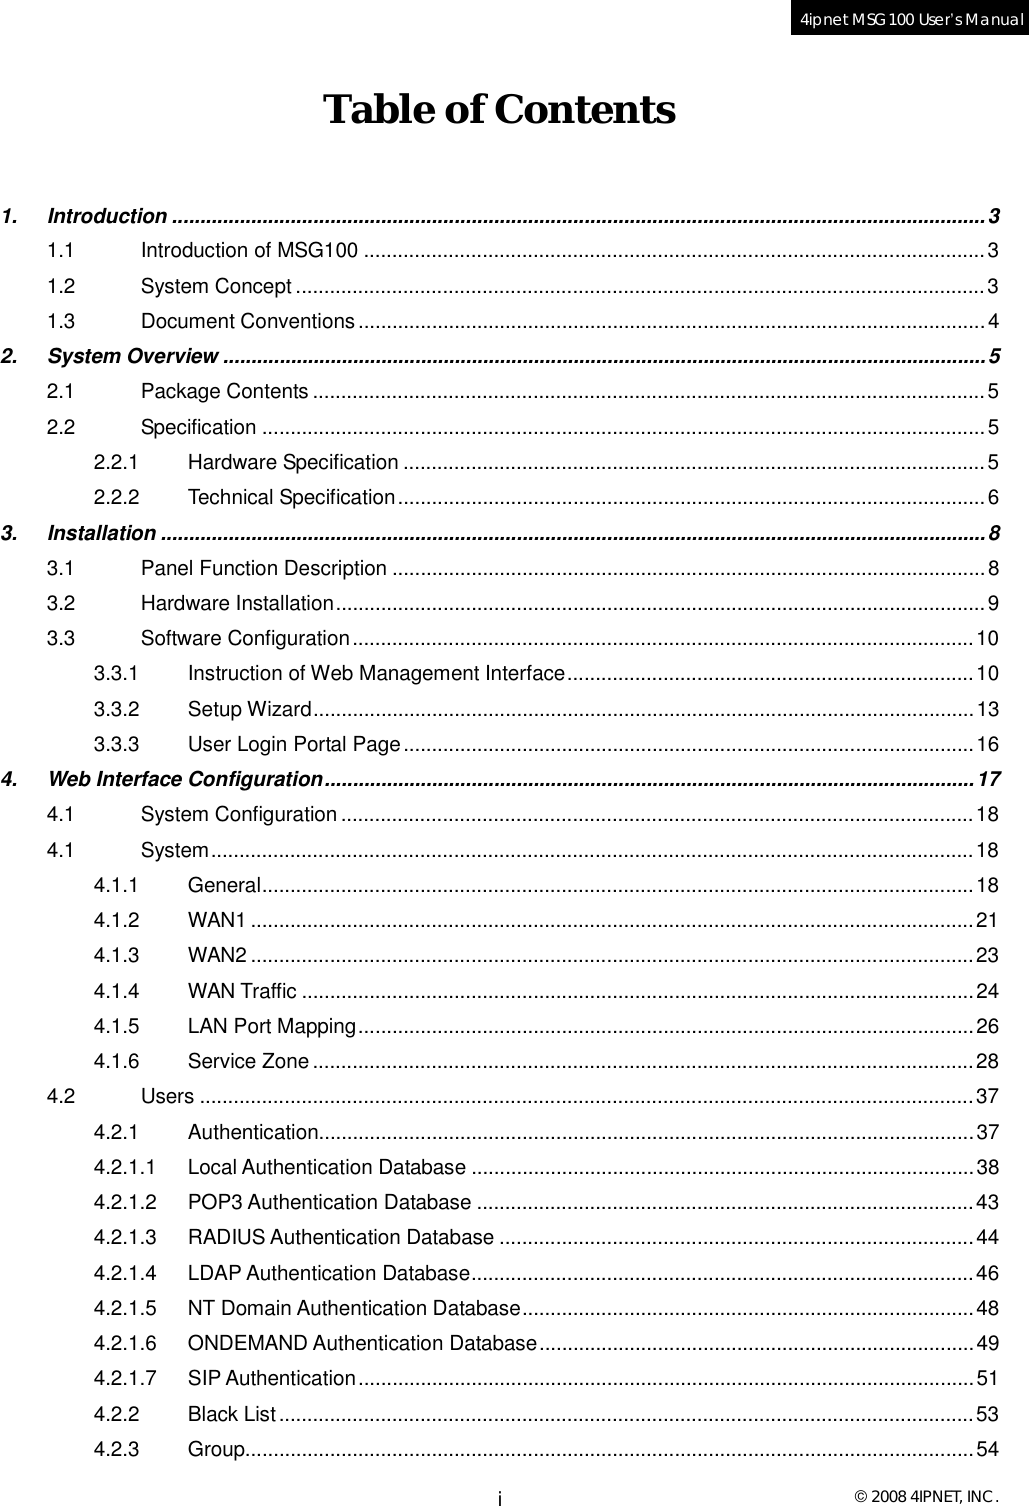  © 2008 4IPNET, INC. i 4ipnet MSG100 User’s Manual  Table of Contents  1. Introduction................................................................................................................................................3 1.1 Introduction of MSG100..............................................................................................................3 1.2 System Concept..........................................................................................................................3 1.3 Document Conventions...............................................................................................................4 2. System Overview.......................................................................................................................................5 2.1 Package Contents.......................................................................................................................5 2.2 Specification................................................................................................................................5 2.2.1 Hardware Specification.......................................................................................................5 2.2.2 Technical Specification........................................................................................................6 3. Installation..................................................................................................................................................8 3.1 Panel Function Description.........................................................................................................8 3.2 Hardware Installation...................................................................................................................9 3.3 Software Configuration..............................................................................................................10 3.3.1 Instruction of Web Management Interface........................................................................10 3.3.2 Setup Wizard.....................................................................................................................13 3.3.3 User Login Portal Page.....................................................................................................16 4. Web Interface Configuration...................................................................................................................17 4.1 System Configuration................................................................................................................18 4.1 System.......................................................................................................................................18 4.1.1 General..............................................................................................................................18 4.1.2 WAN1................................................................................................................................21 4.1.3 WAN2................................................................................................................................23 4.1.4 WAN Traffic.......................................................................................................................24 4.1.5 LAN Port Mapping.............................................................................................................26 4.1.6 Service Zone.....................................................................................................................28 4.2 Users.........................................................................................................................................37 4.2.1 Authentication....................................................................................................................37 4.2.1.1 Local Authentication Database.........................................................................................38 4.2.1.2 POP3 Authentication Database........................................................................................43 4.2.1.3 RADIUS Authentication Database....................................................................................44 4.2.1.4 LDAP Authentication Database.........................................................................................46 4.2.1.5 NT Domain Authentication Database................................................................................48 4.2.1.6 ONDEMAND Authentication Database.............................................................................49 4.2.1.7 SIP Authentication.............................................................................................................51 4.2.2 Black List...........................................................................................................................53 4.2.3 Group.................................................................................................................................54 